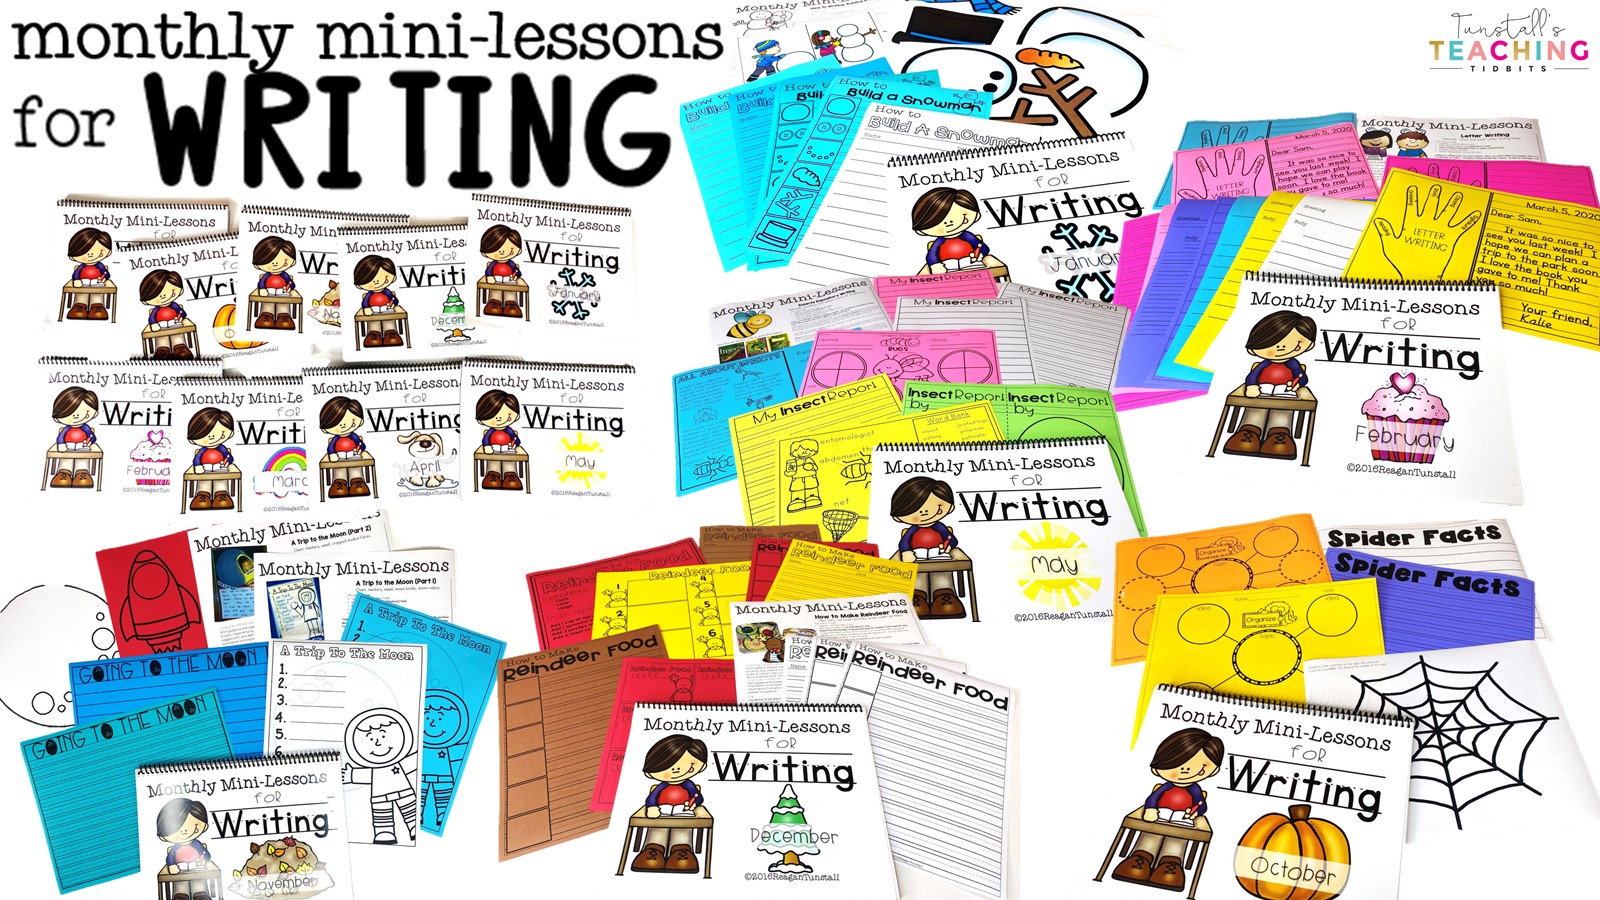 Writing Mini-Lessons for the Year